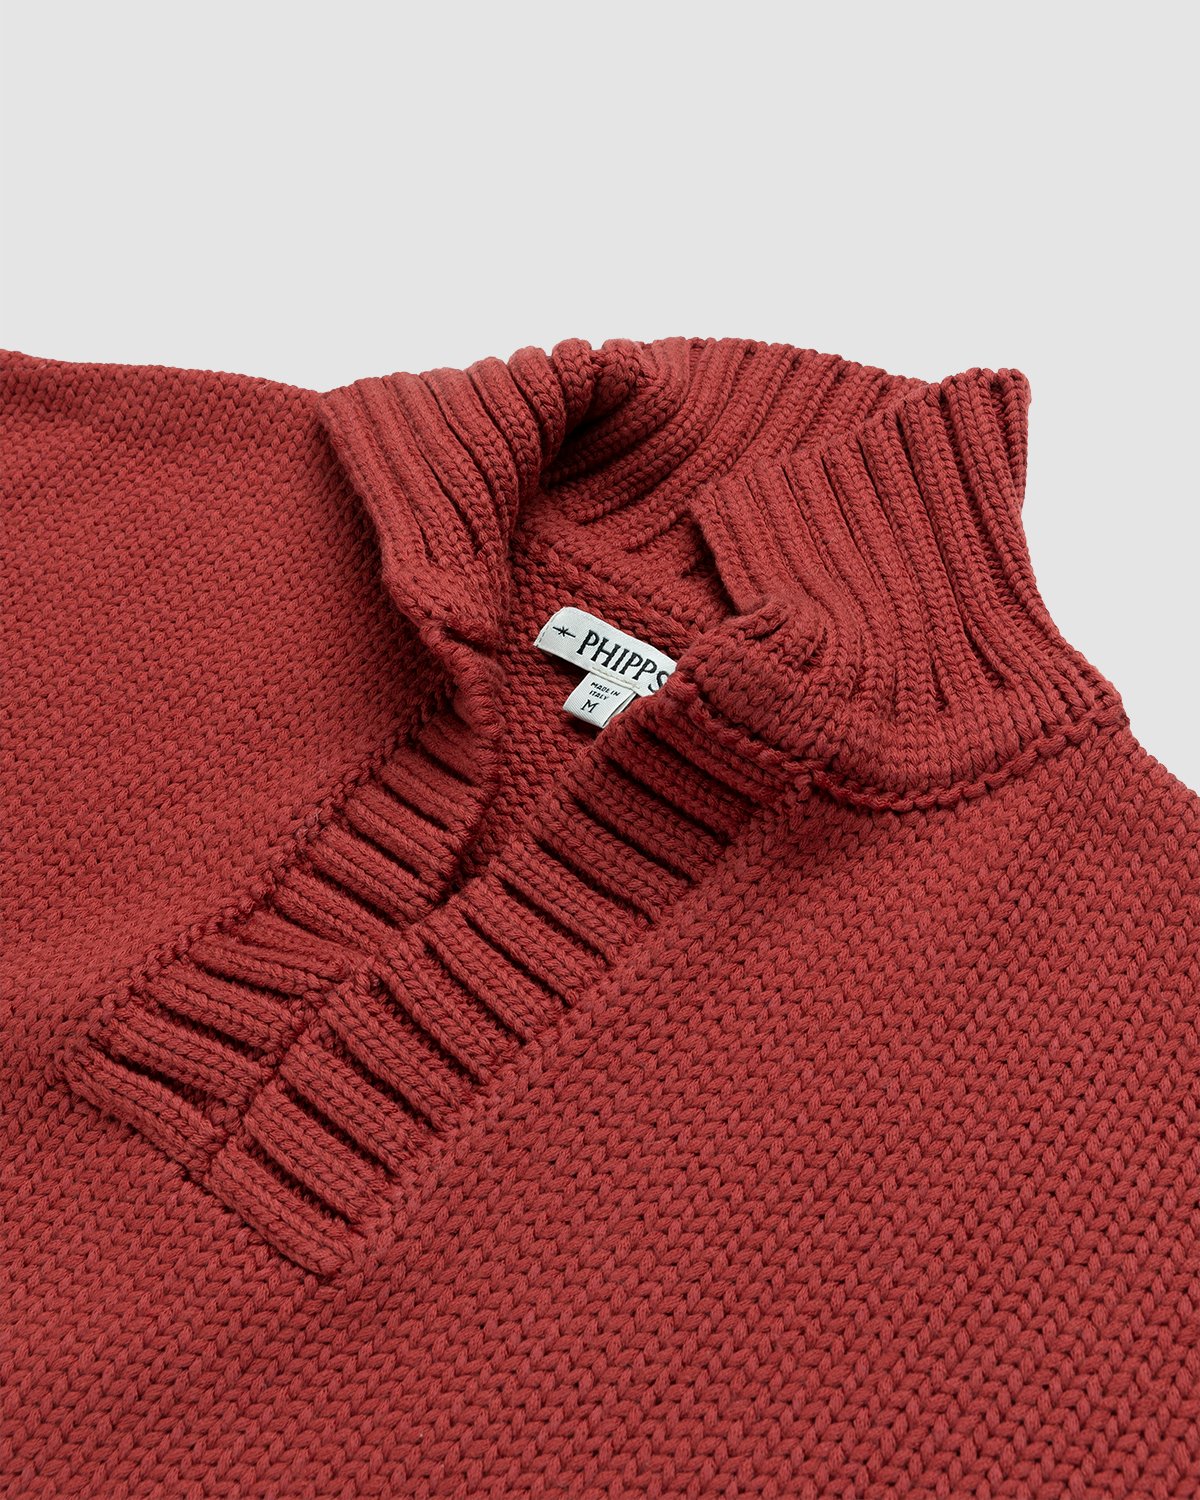 Phipps - Vareuse Sweater Rust - Clothing - Red - Image 3